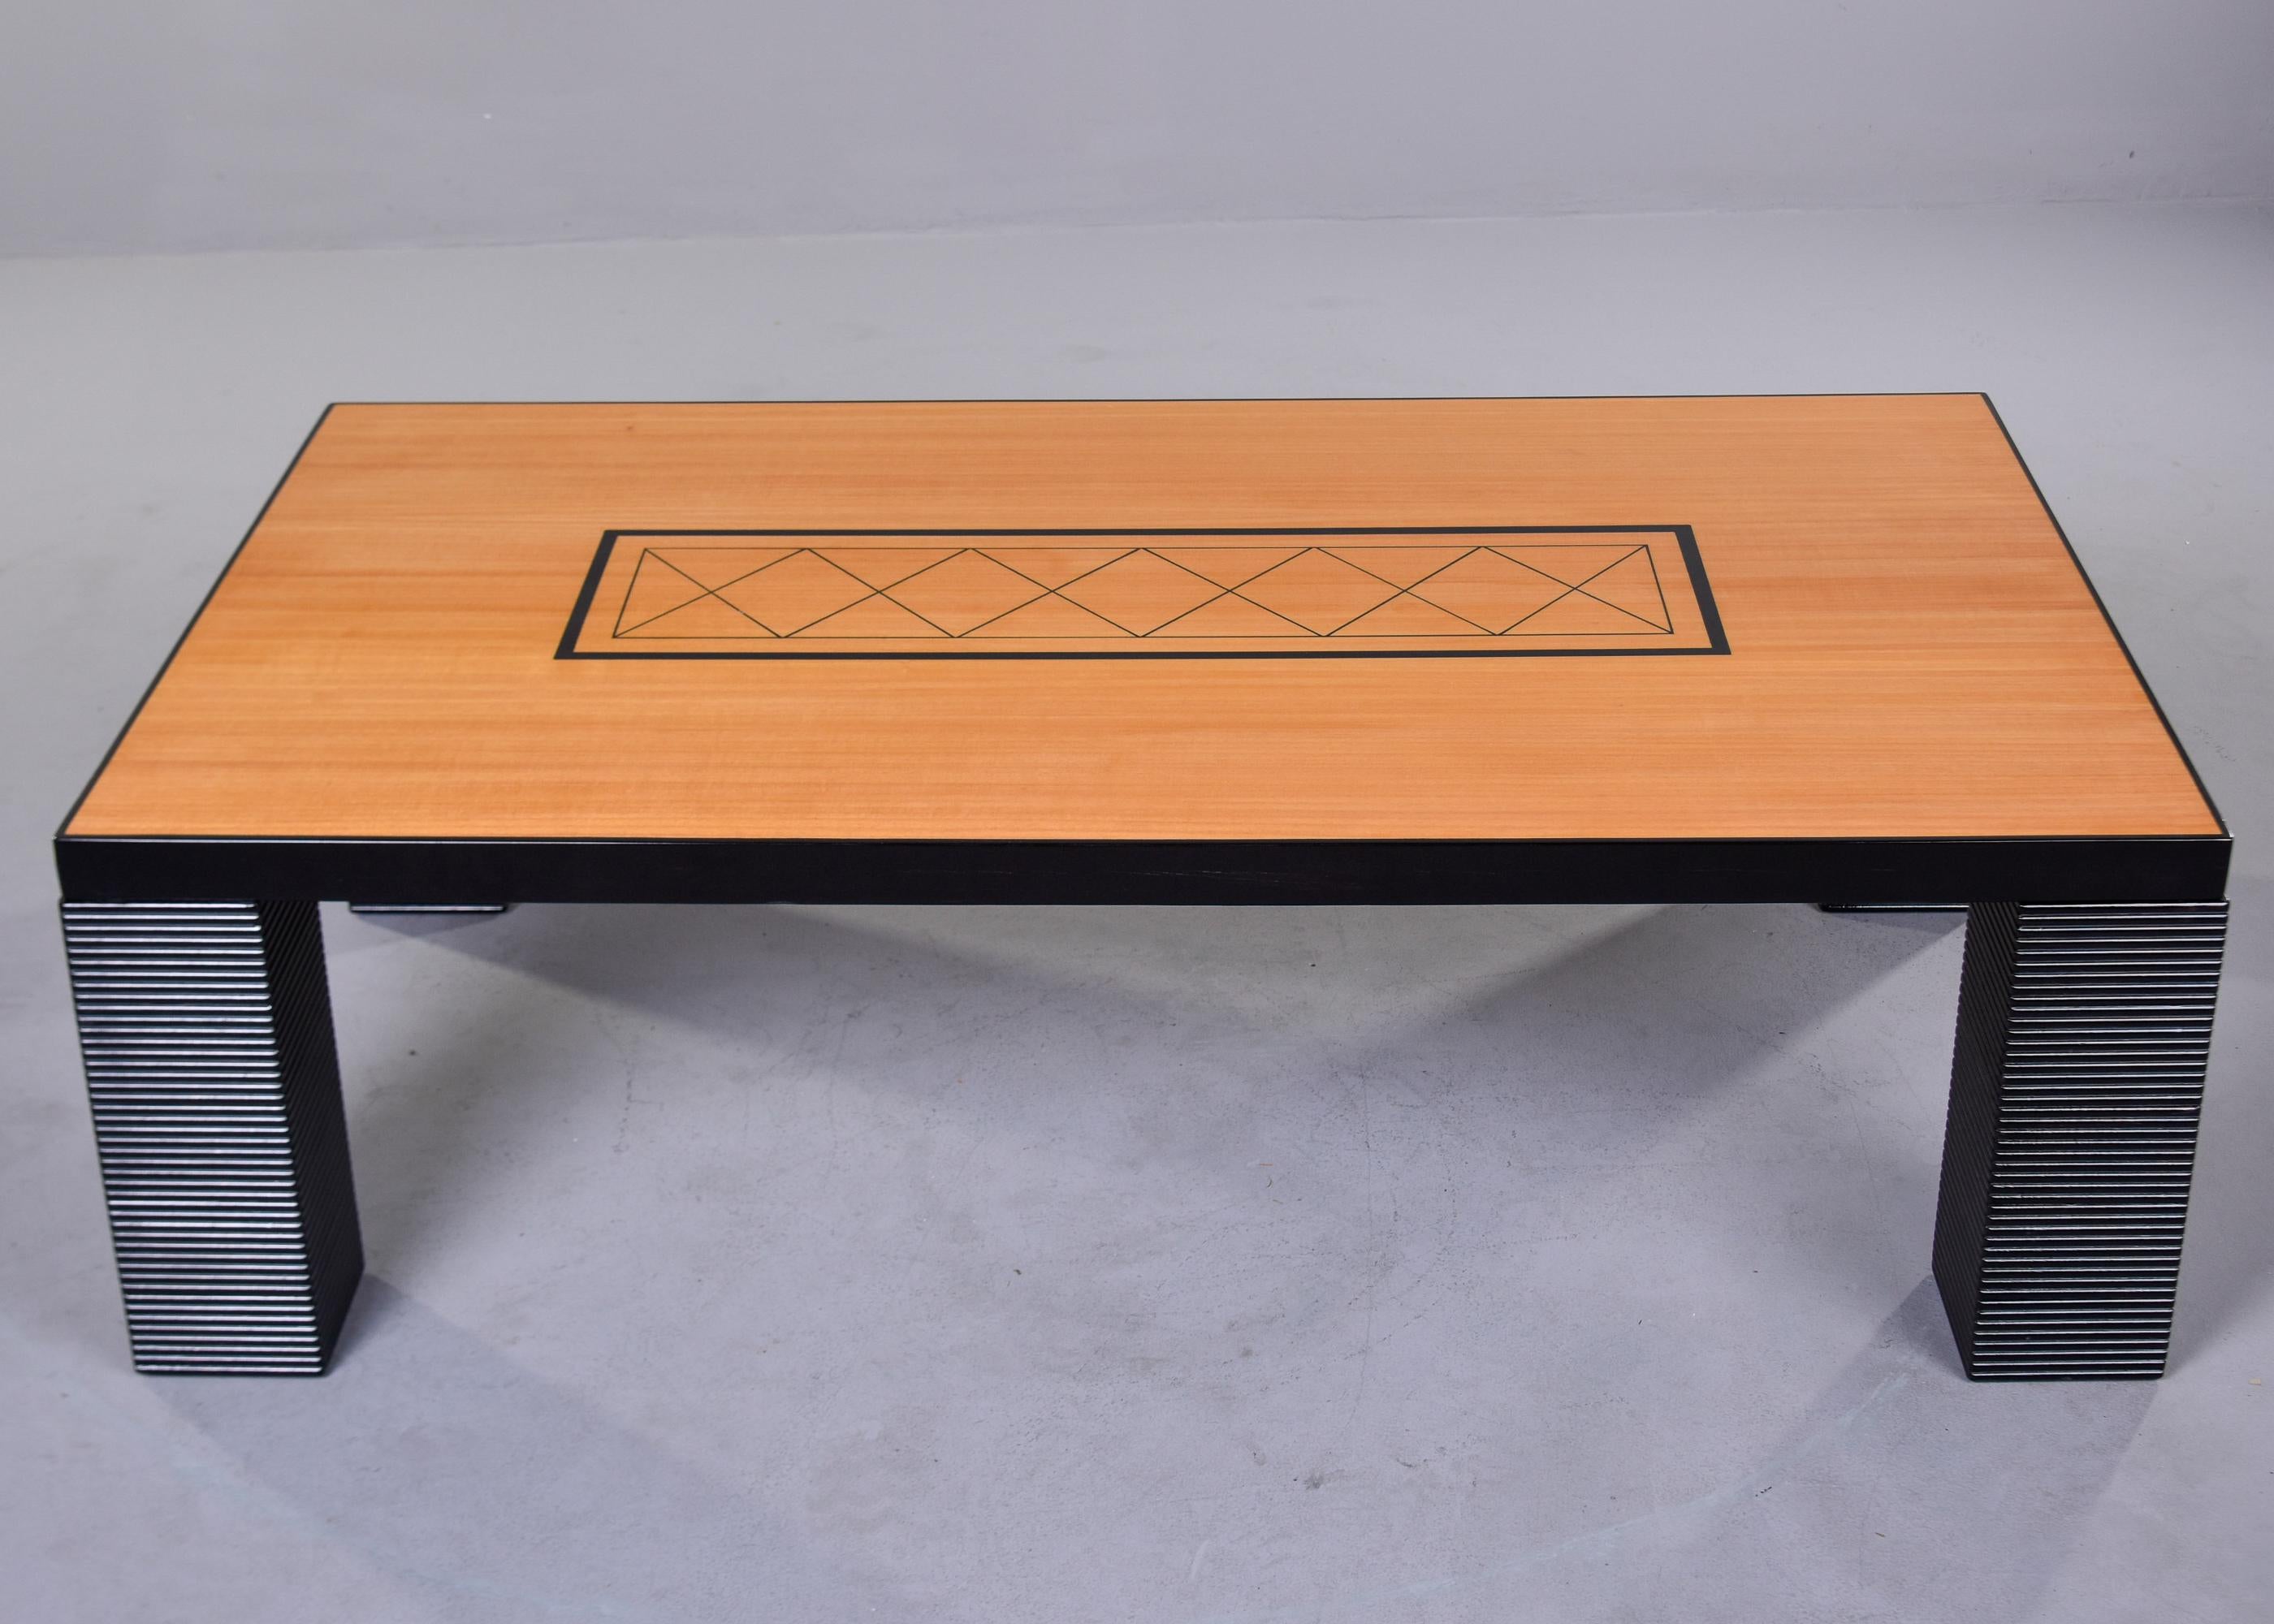 Oversized Italian Art Deco Birch and Black Coffee Table For Sale 1